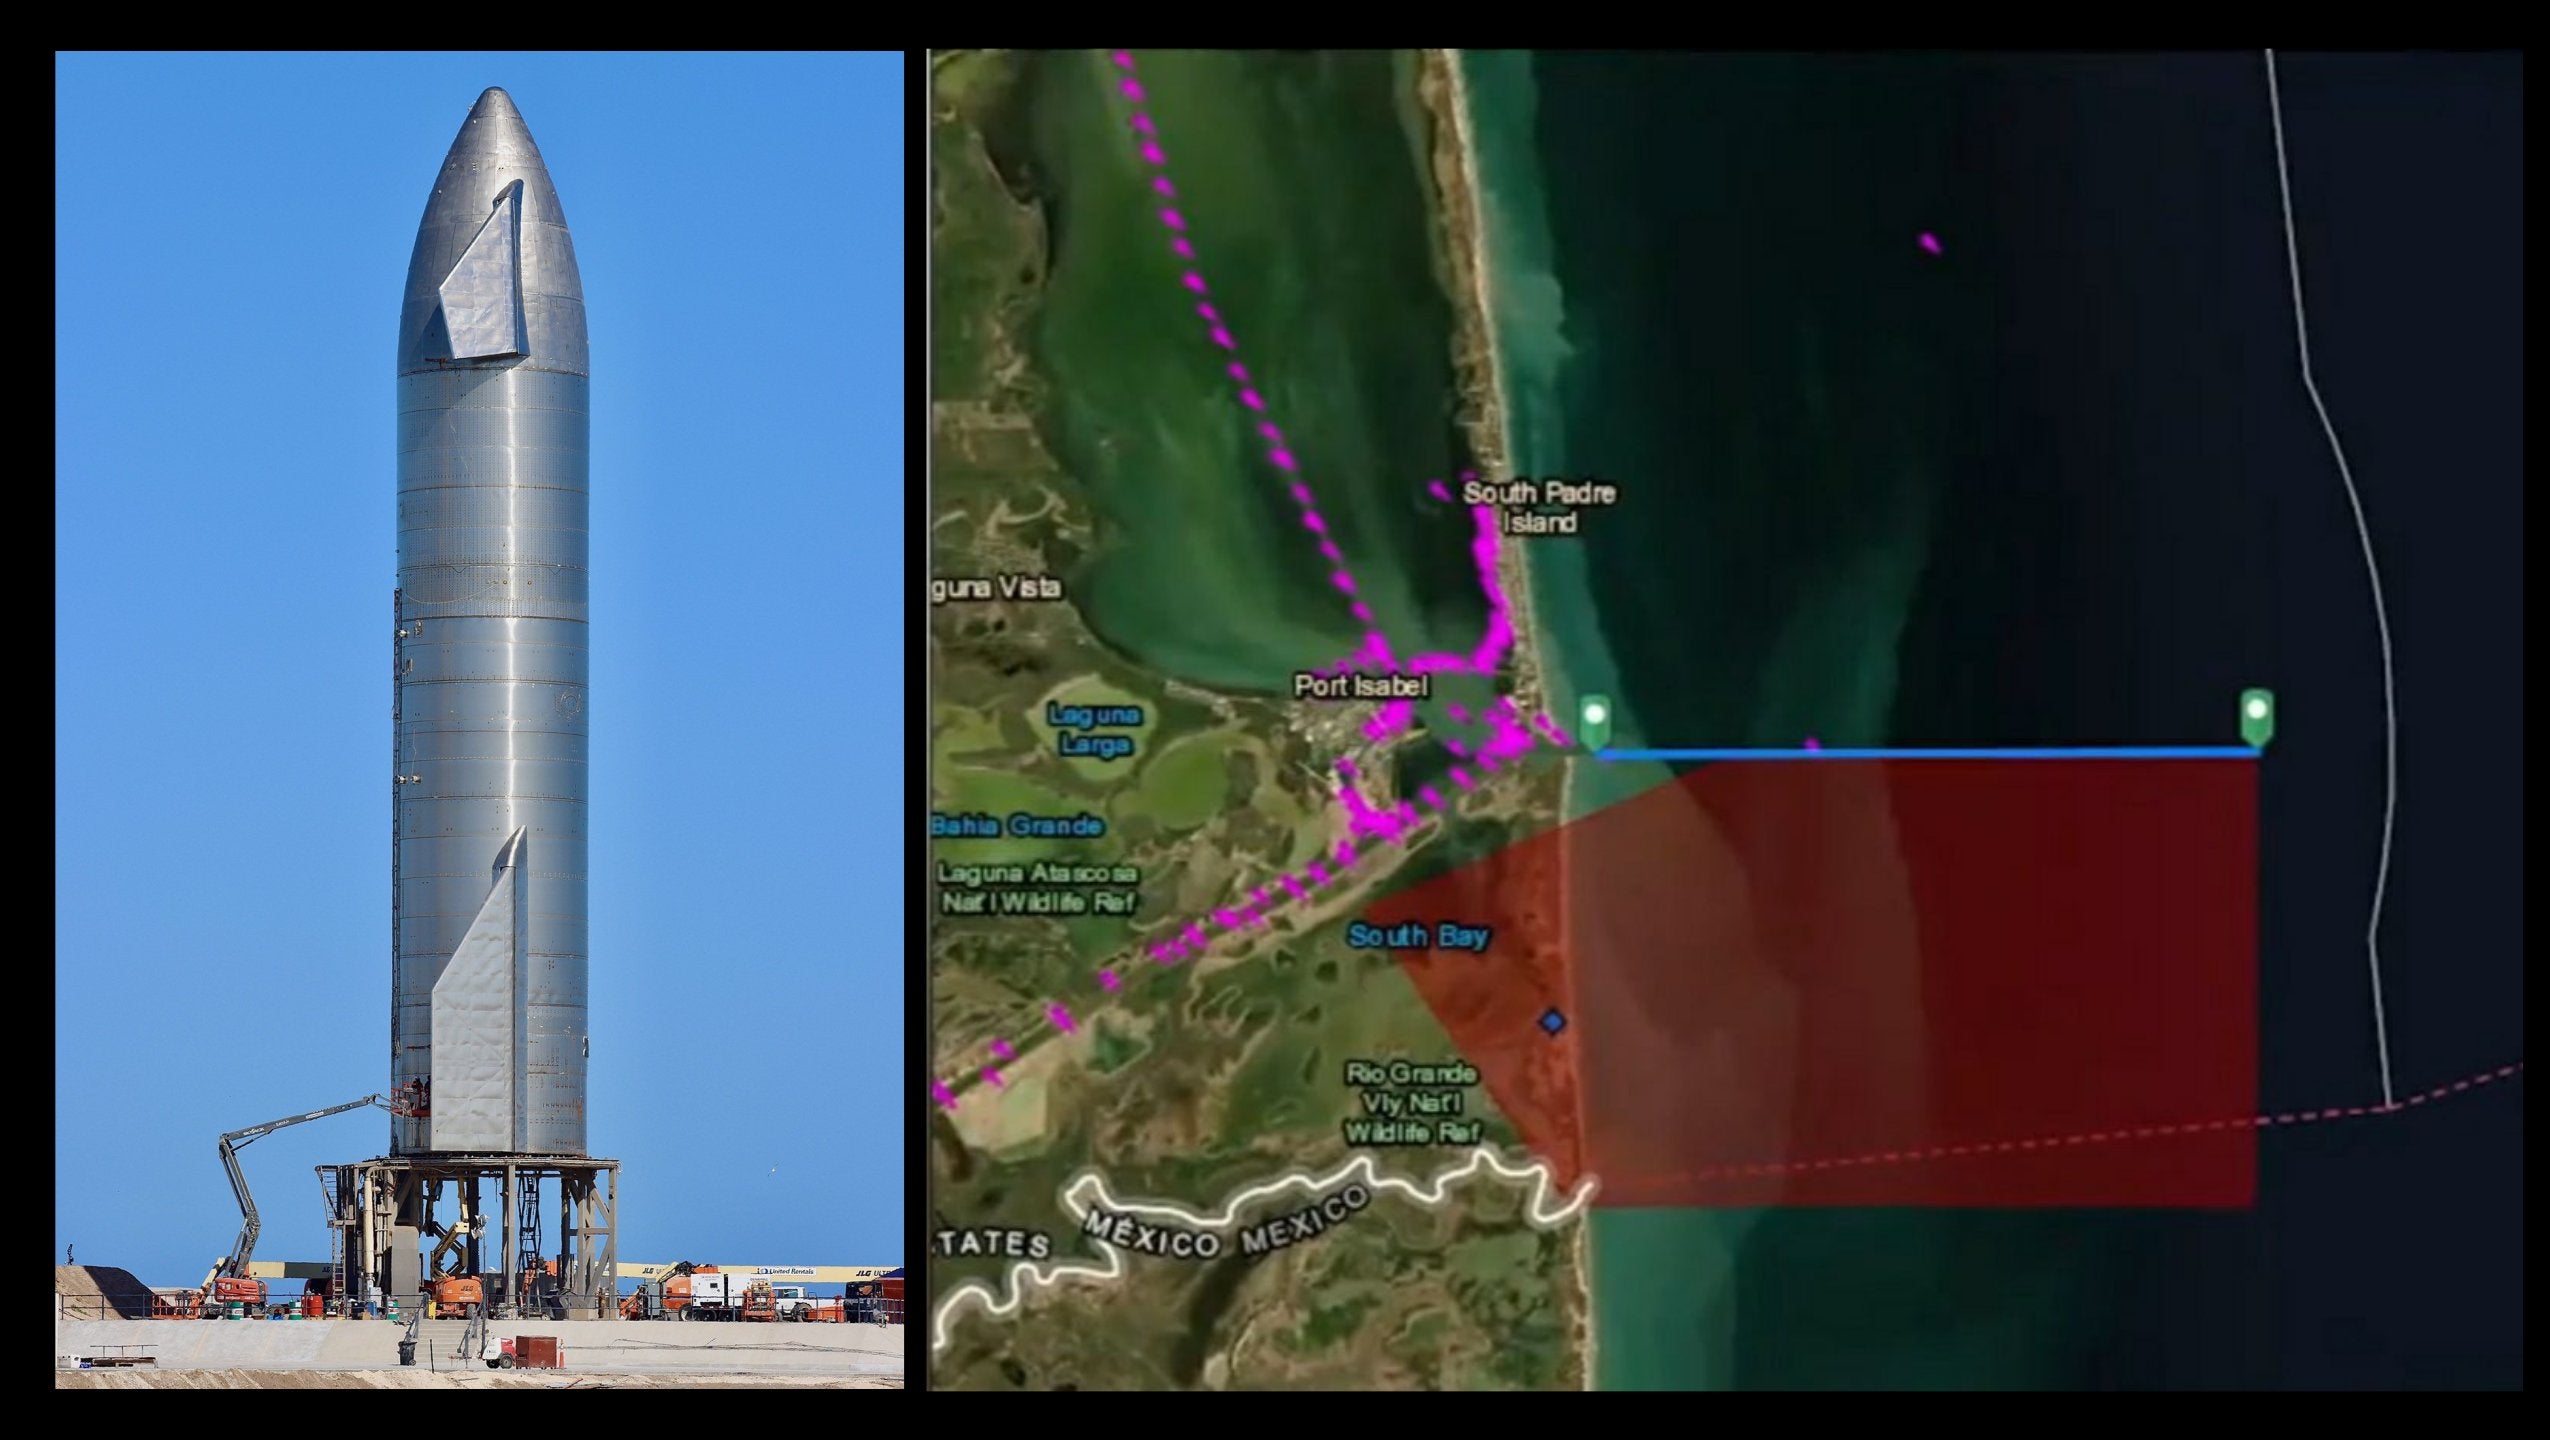 SpaceX issues a 'self-destruct zone' in the Gulf of Mexico in case Starship SN8's debut test flight fails